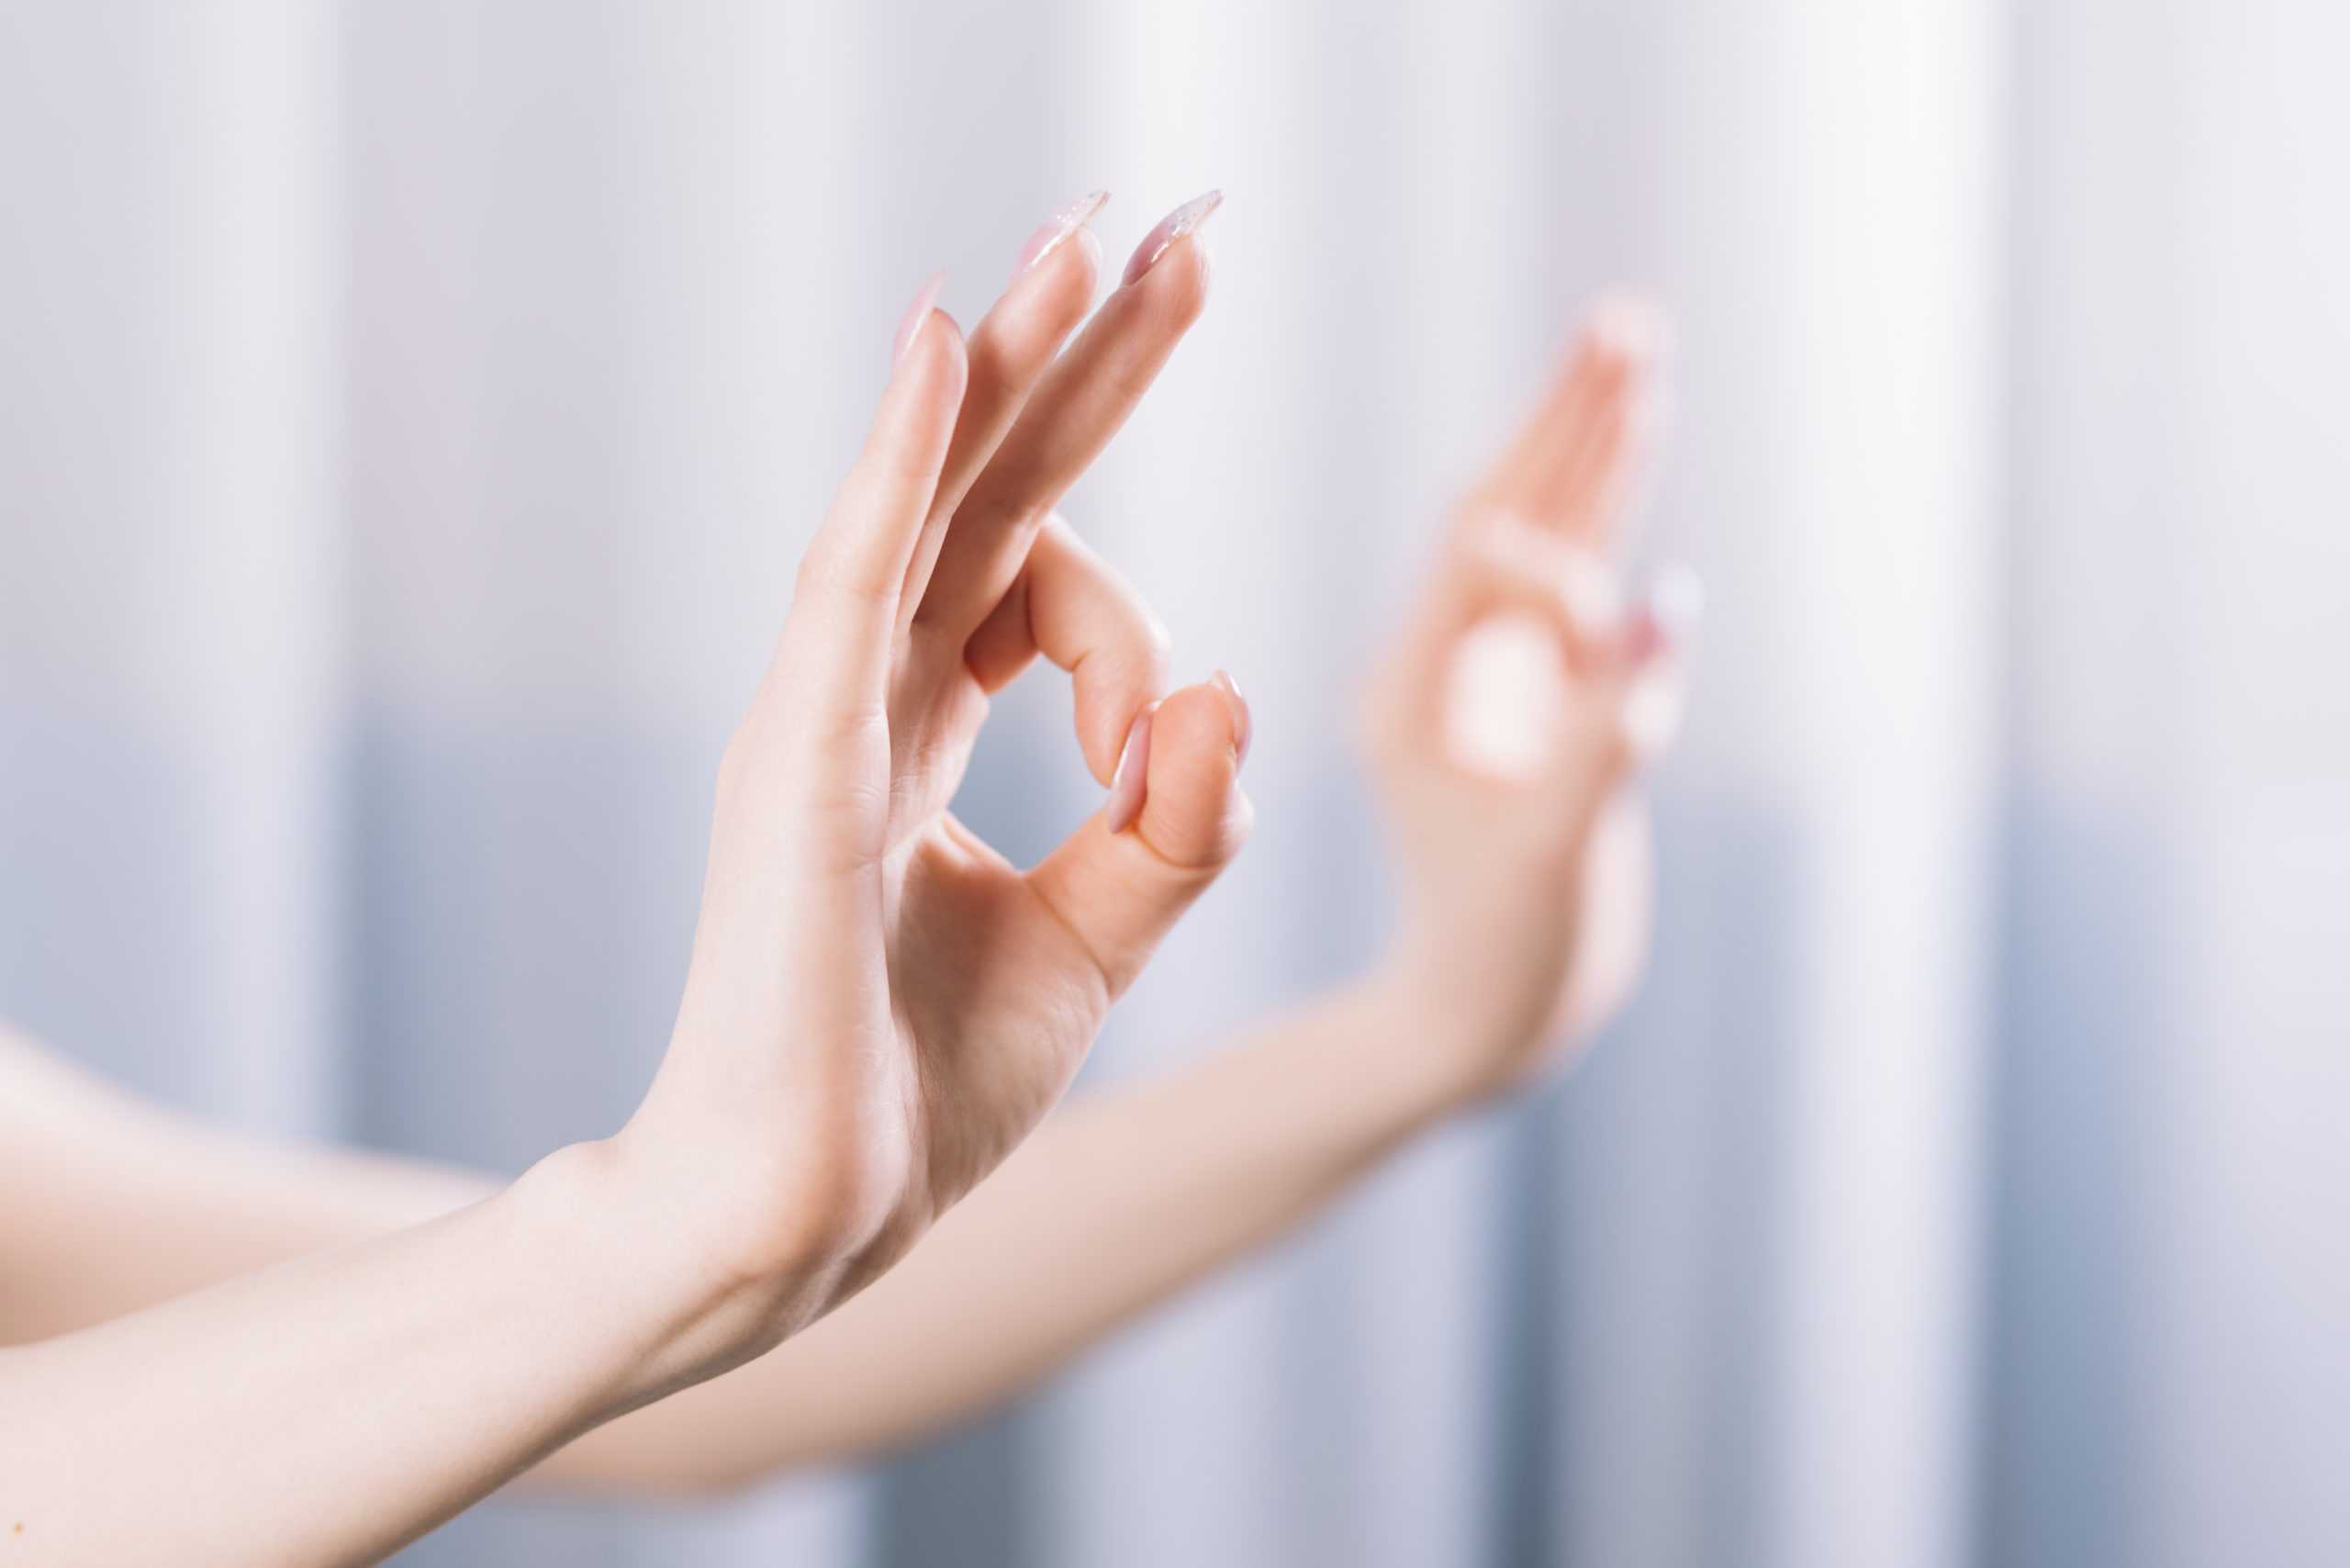 close-up-hand-showing-gyan-mudra-gesture-scaled